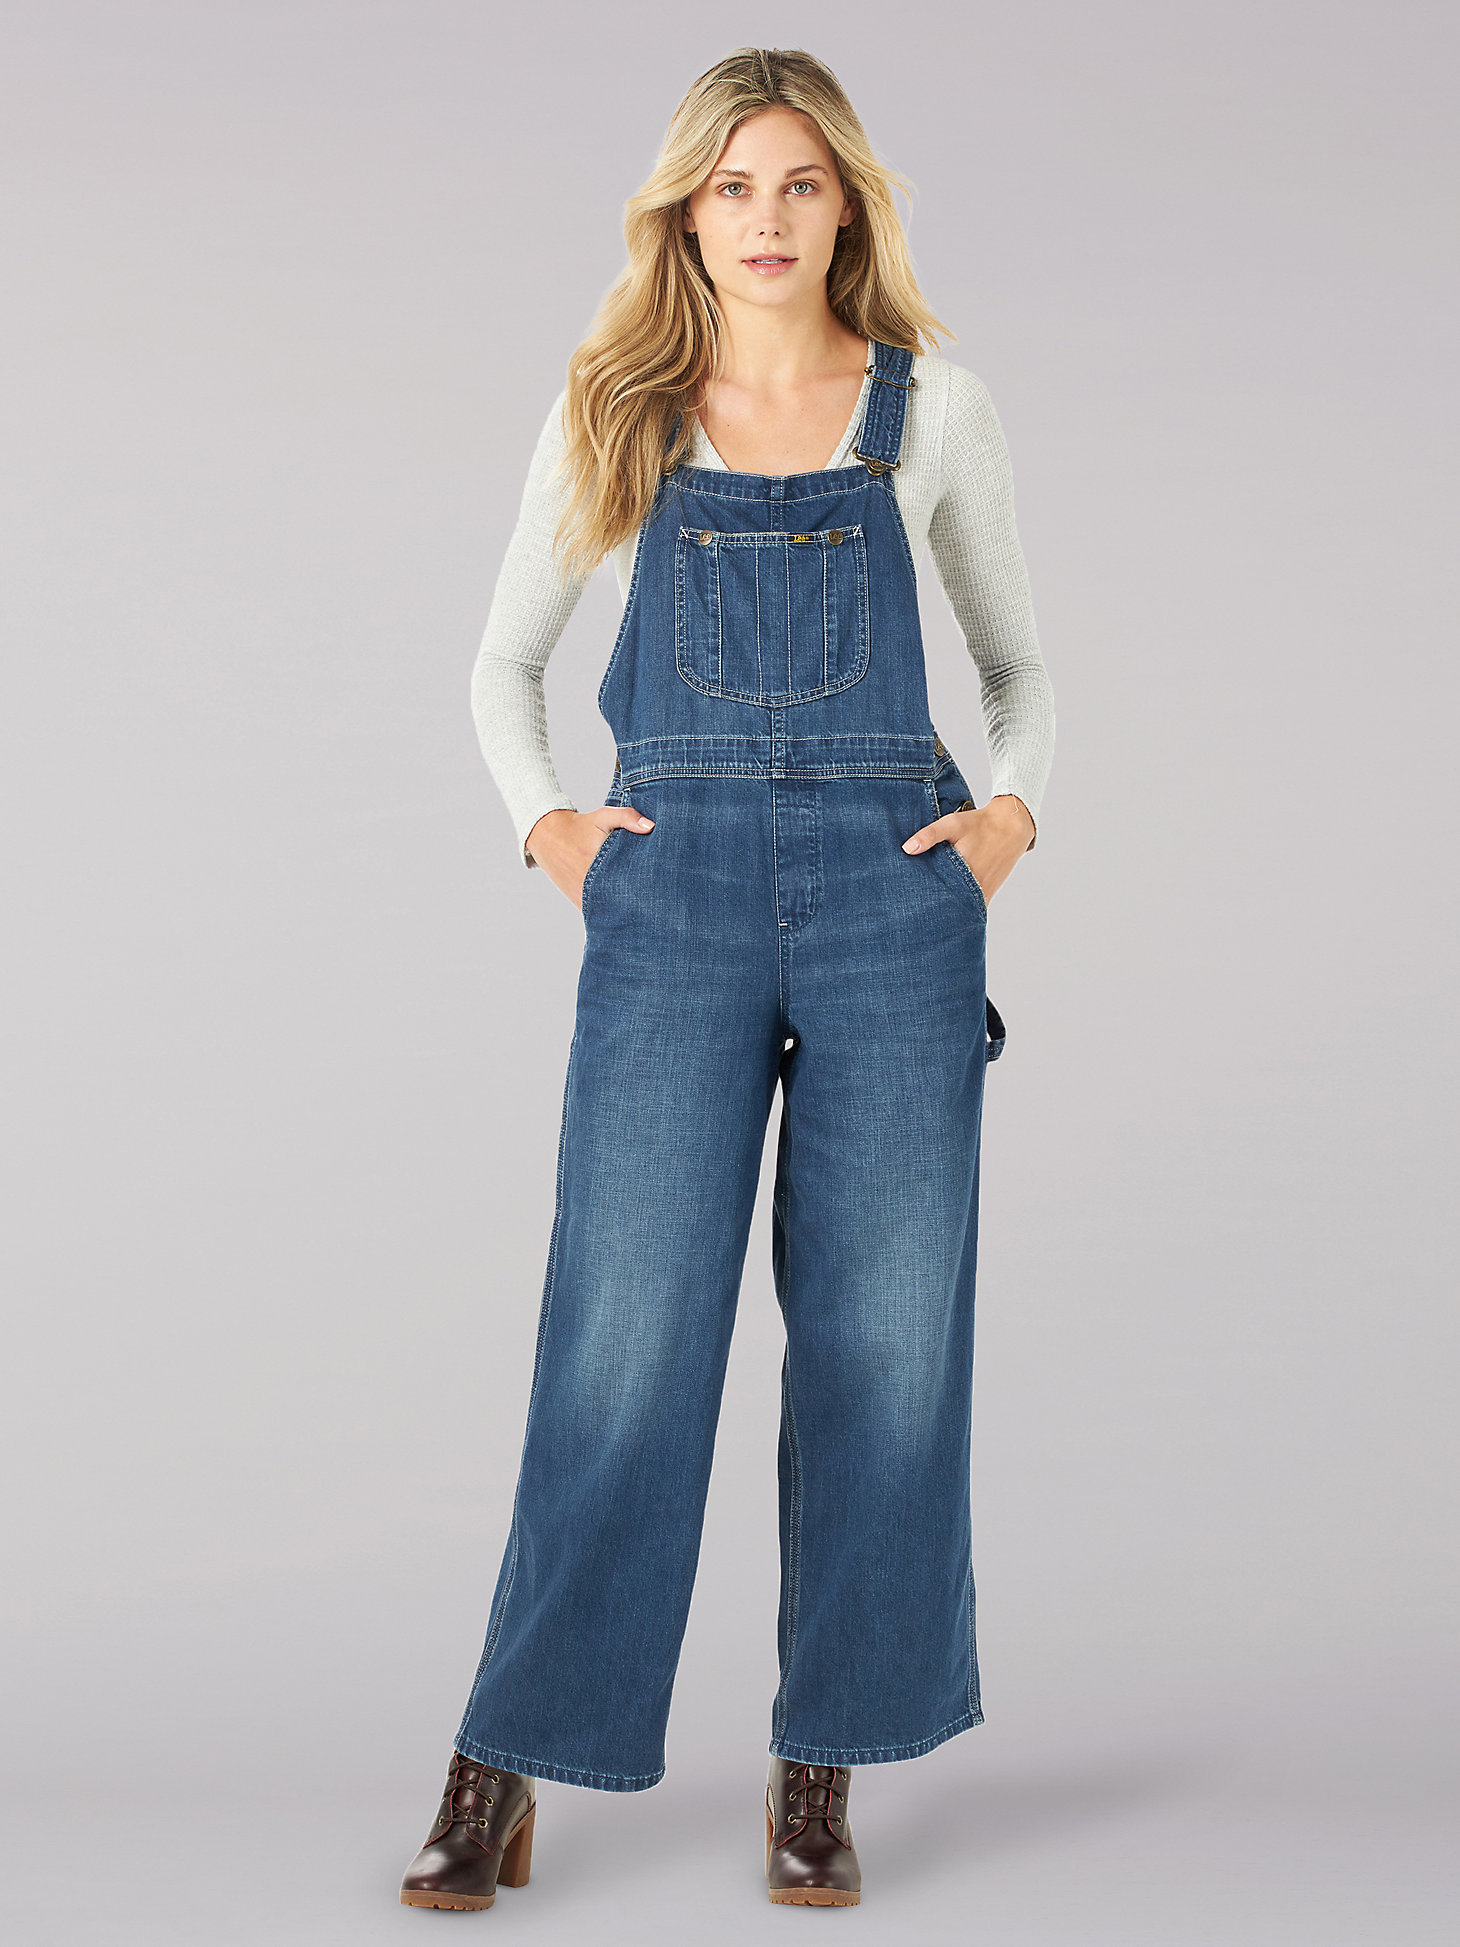 Women's Vintage Modern Relaxed Overall in Kansas Fade main view